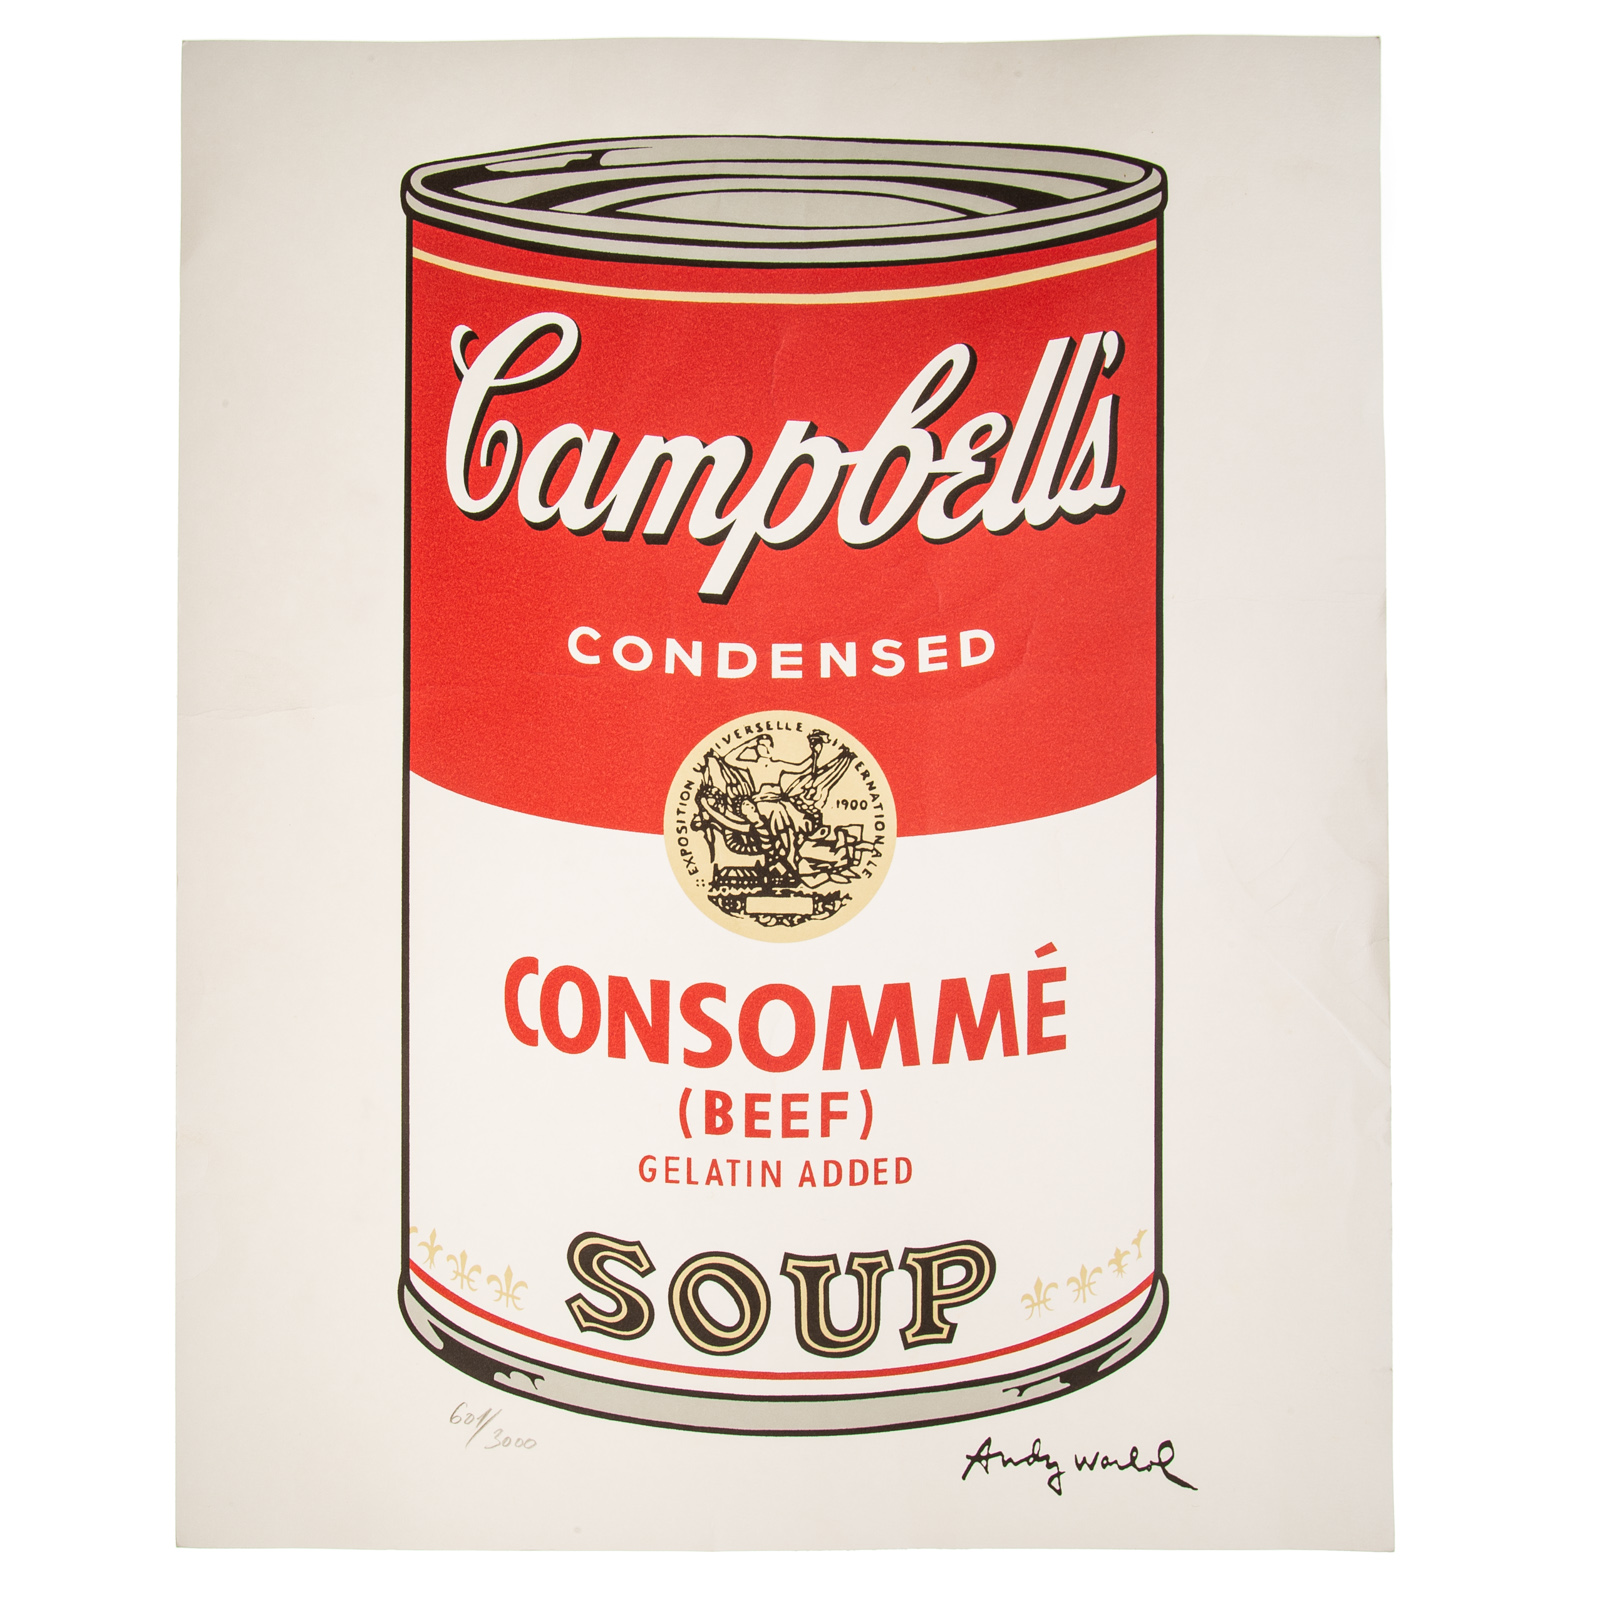 AFTER ANDY WARHOL. CAMPBELL SOUP